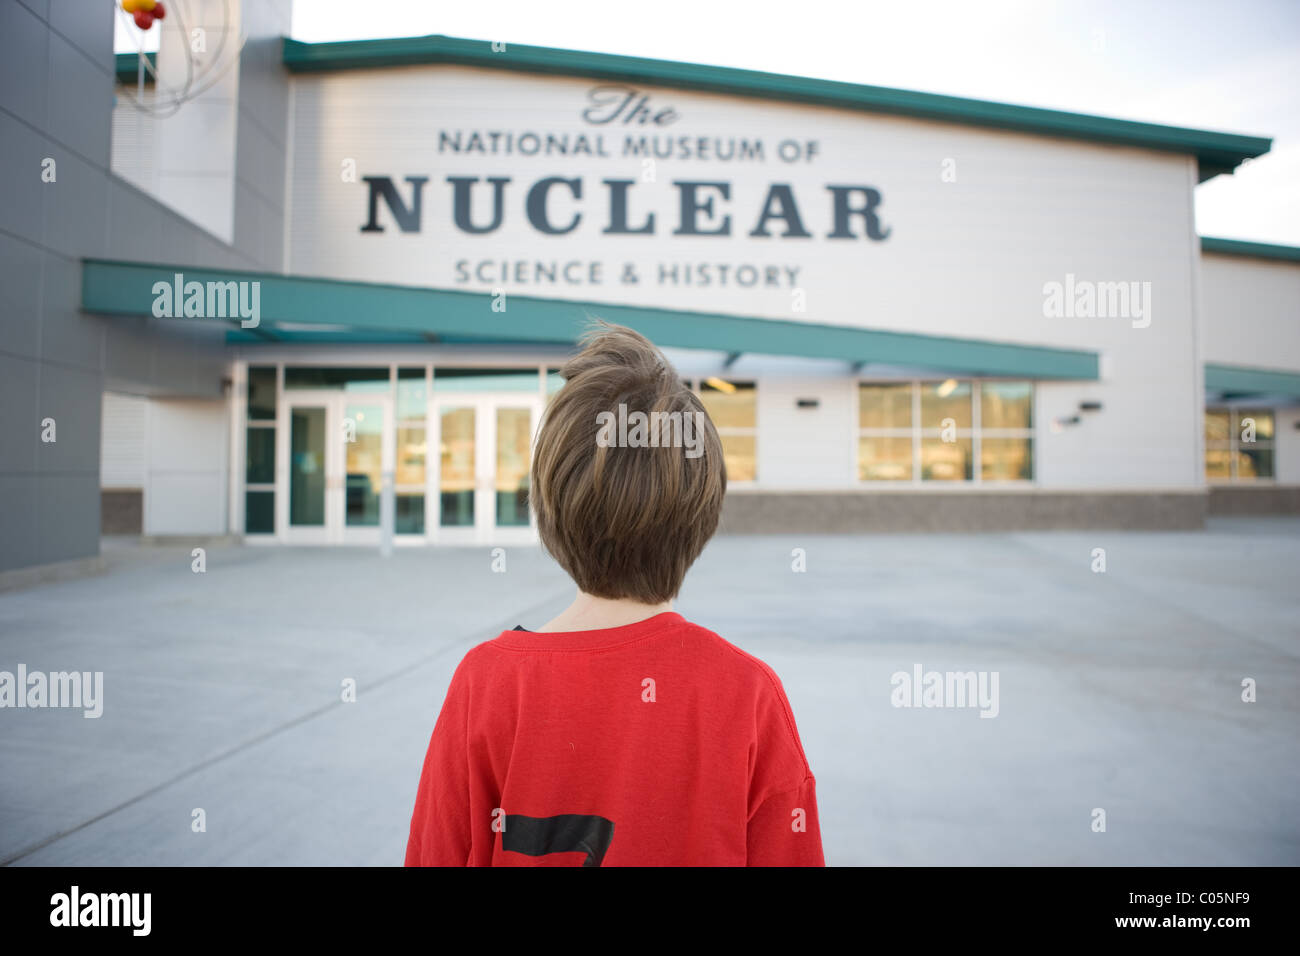 Young boy standing in front of The National Museum of Nuclear Science and History, Albuquerque, New Mexico. Stock Photo